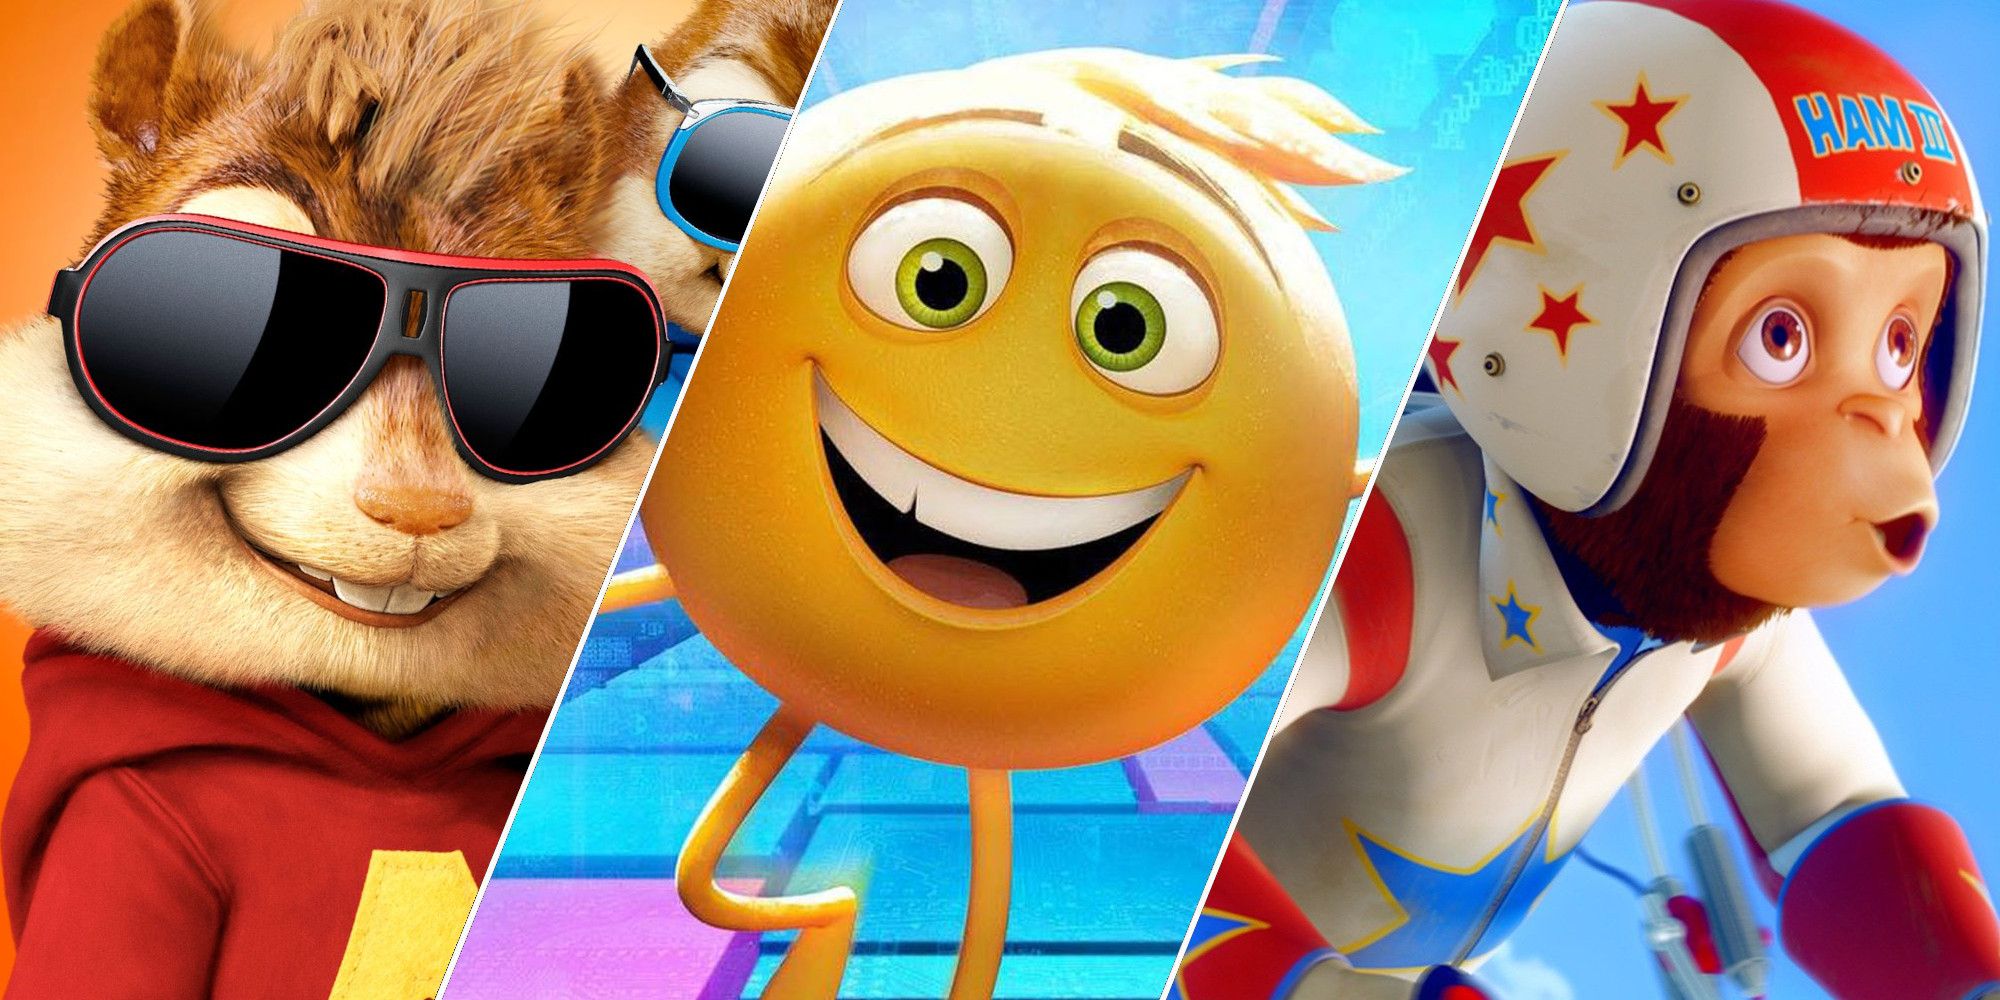 10 Worst Animated Movies of the 2010s, According to Letterboxd